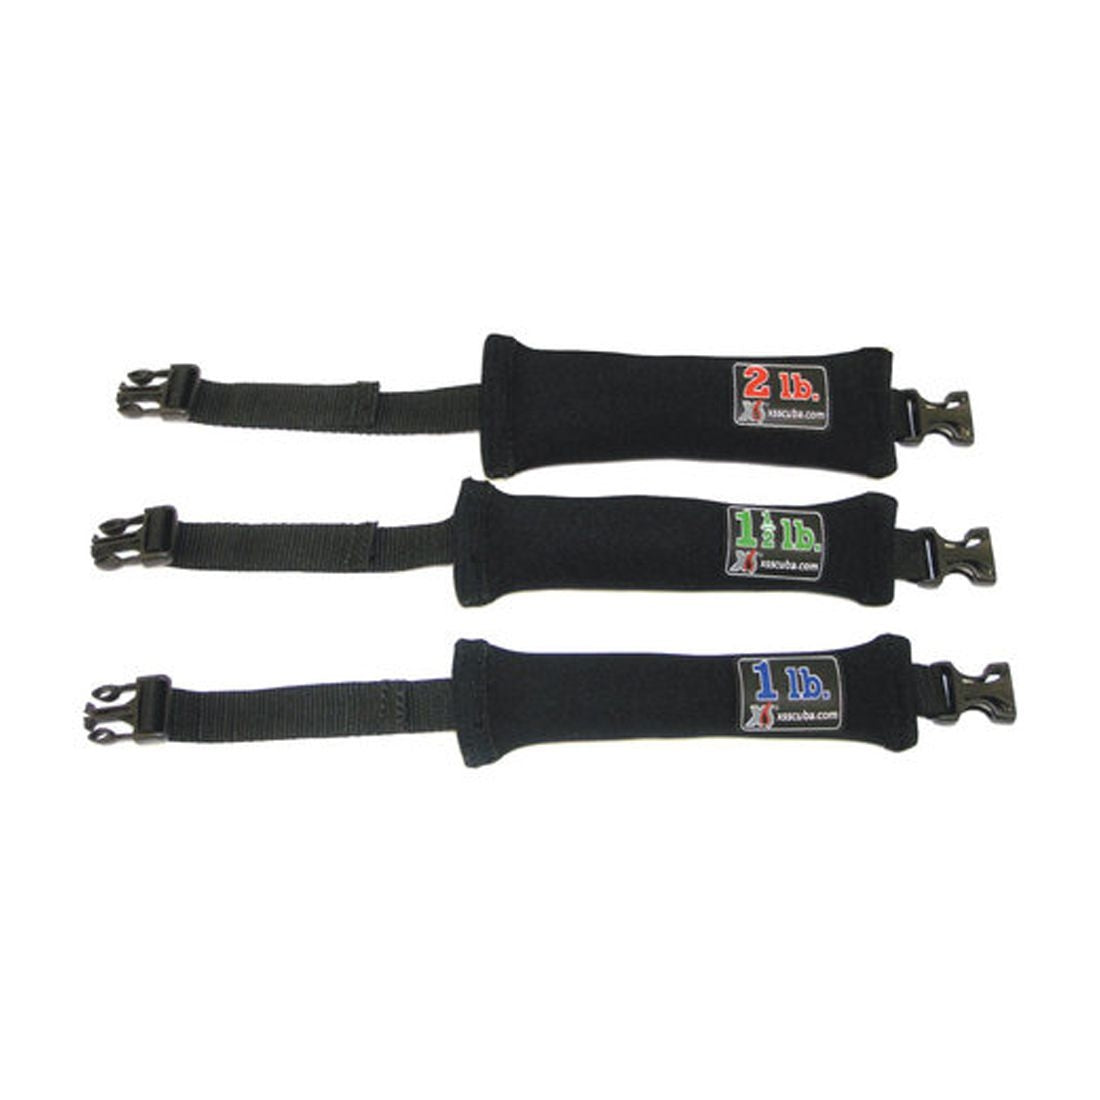 XS Scuba Ankle Weight Set Scuba Diving Ankle Weights - Sold in pairs o ...